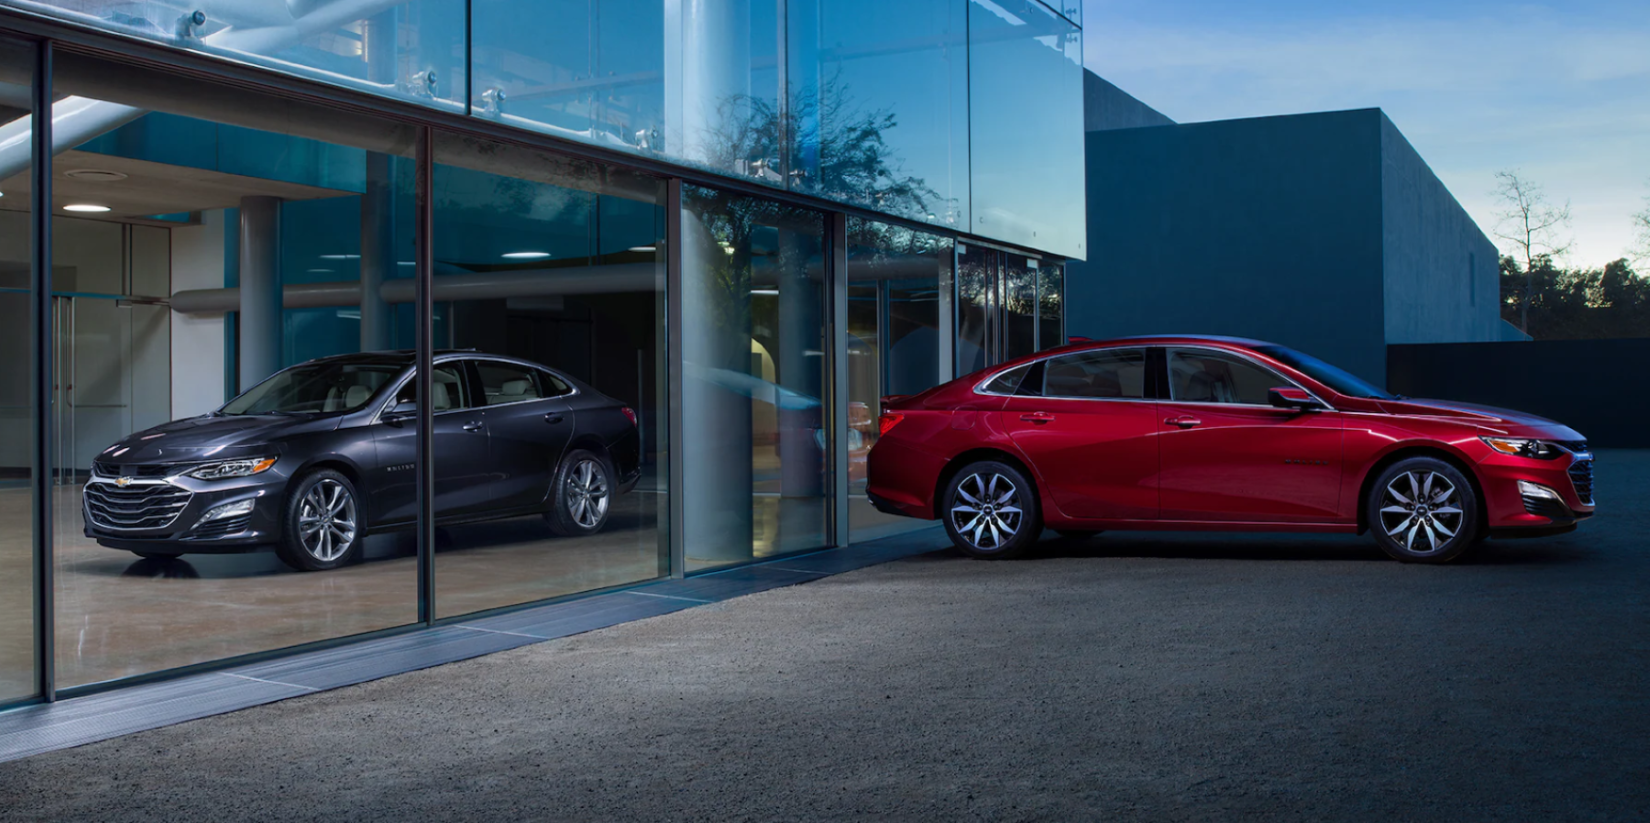 2023 Chevrolet Malibu midsize sedan models in gray and red separated by glass panels